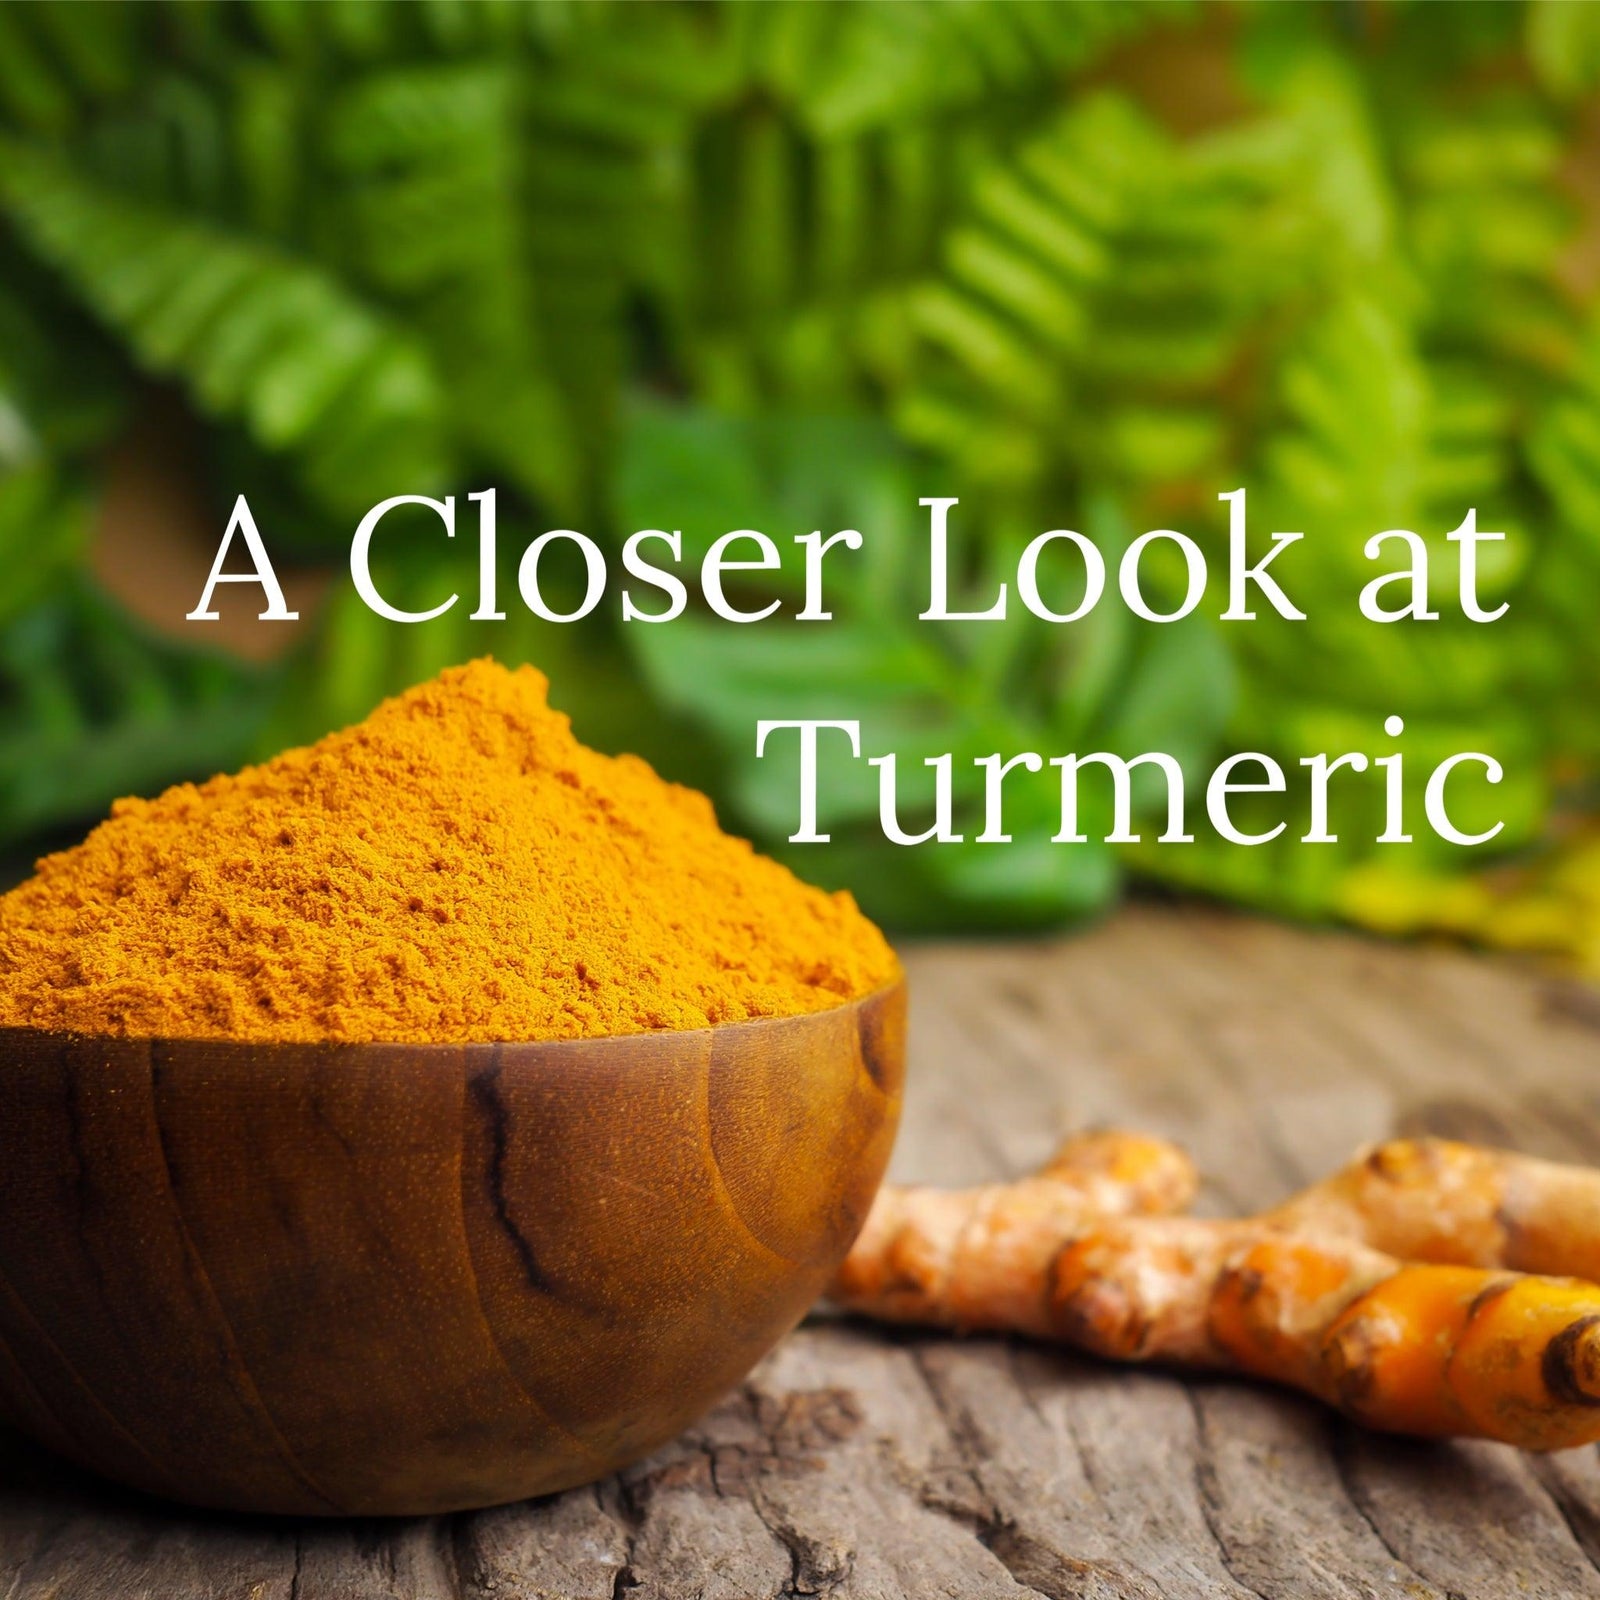 Turmeric: What’s the Real Story? Is it Safe During Pregnancy? - NutraBump Nutrition pregnancy gut health, pregnancy health, pregnancy nutrition, turmeric